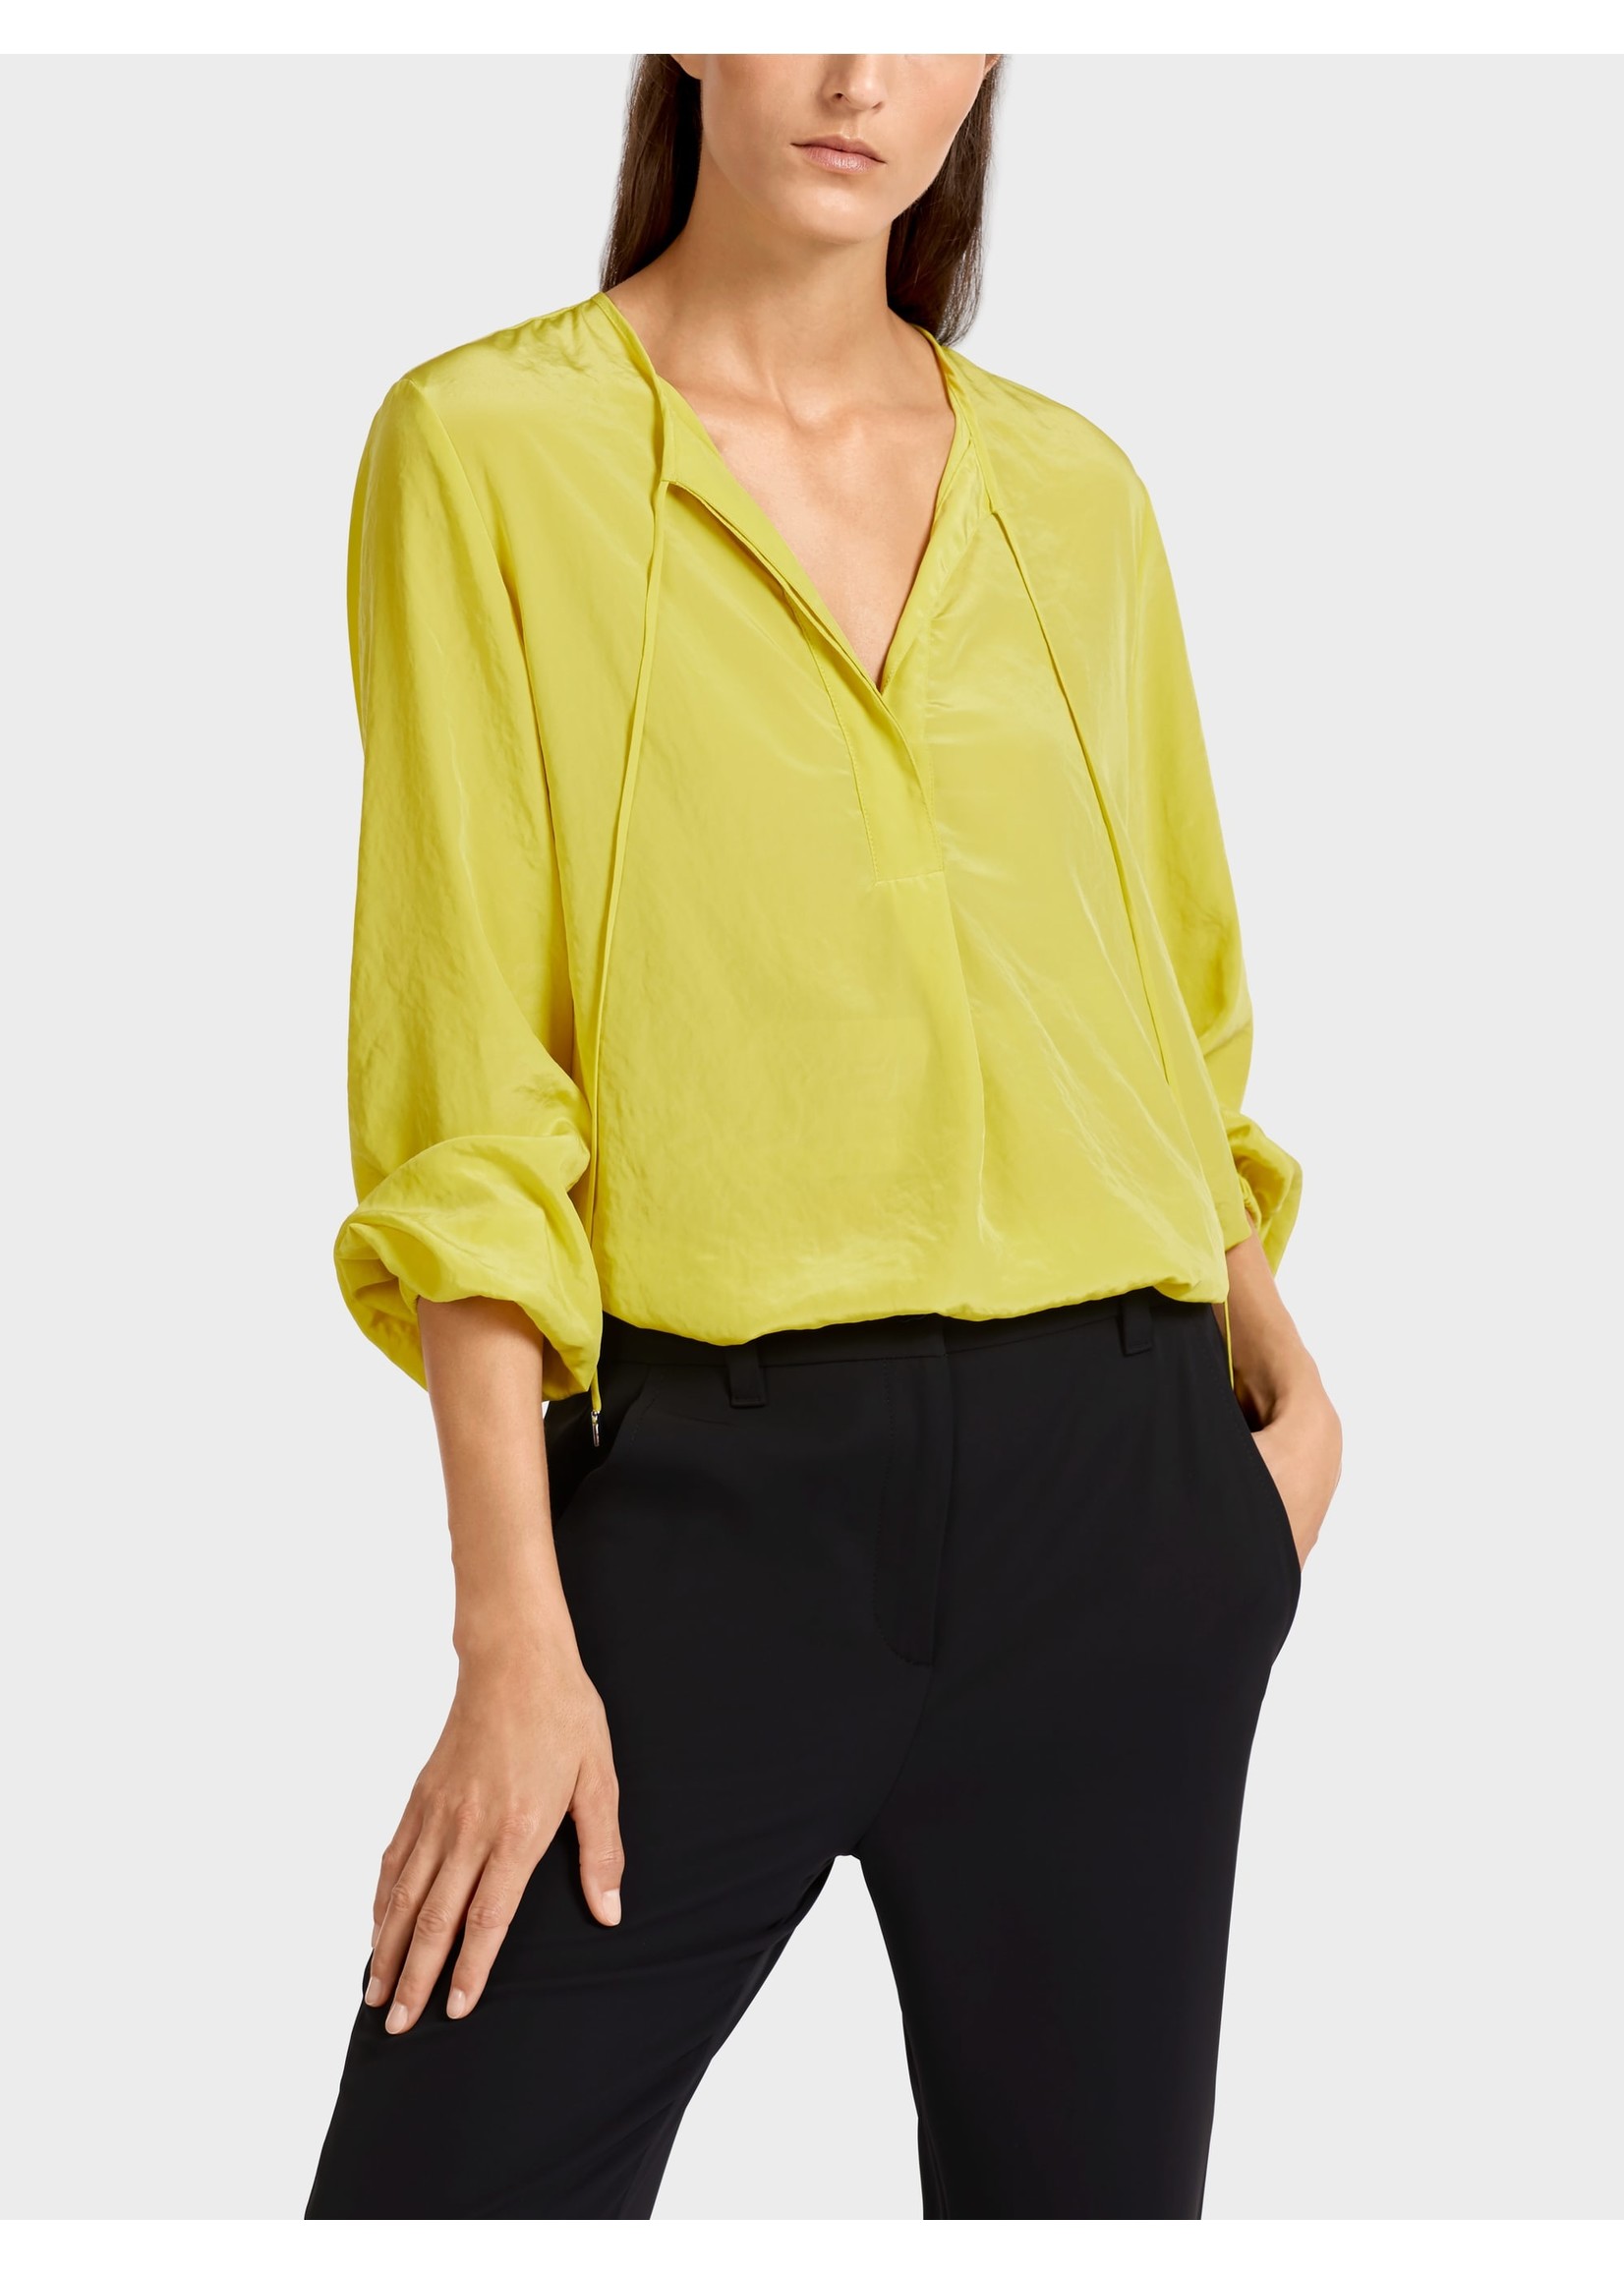 Marccain Sports Blouse  US 55.04 W76 511